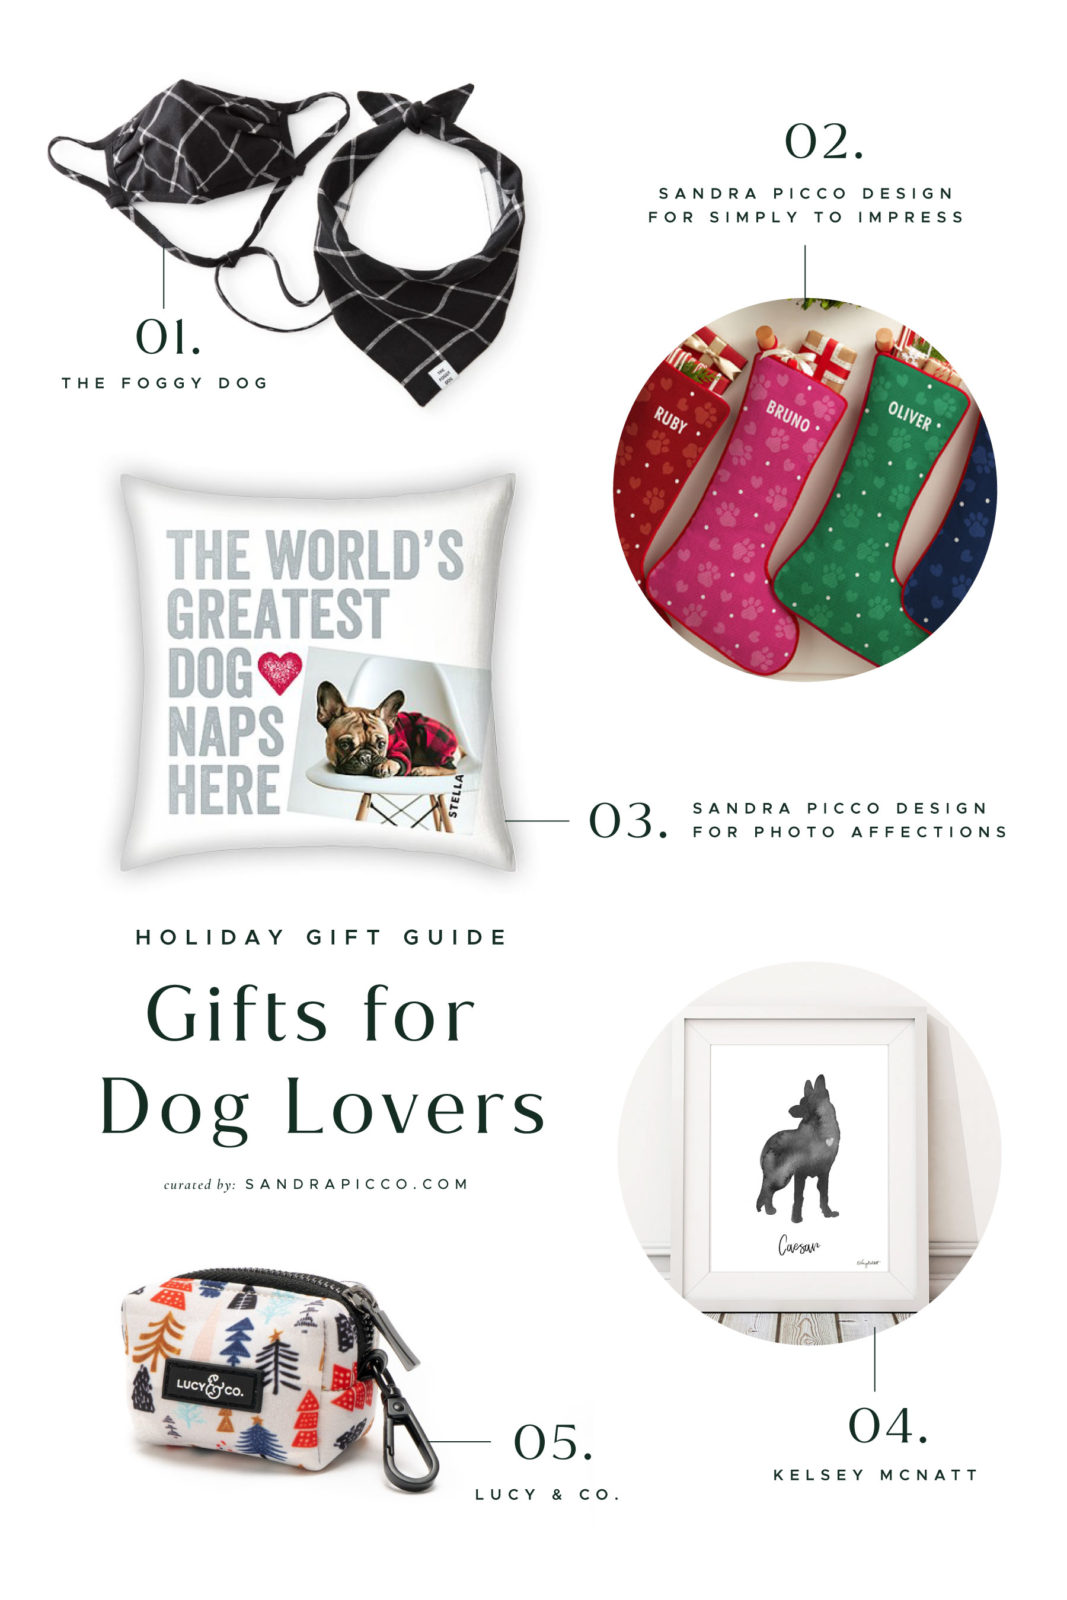 This is a holiday gift guide for new dog owners and pet parents